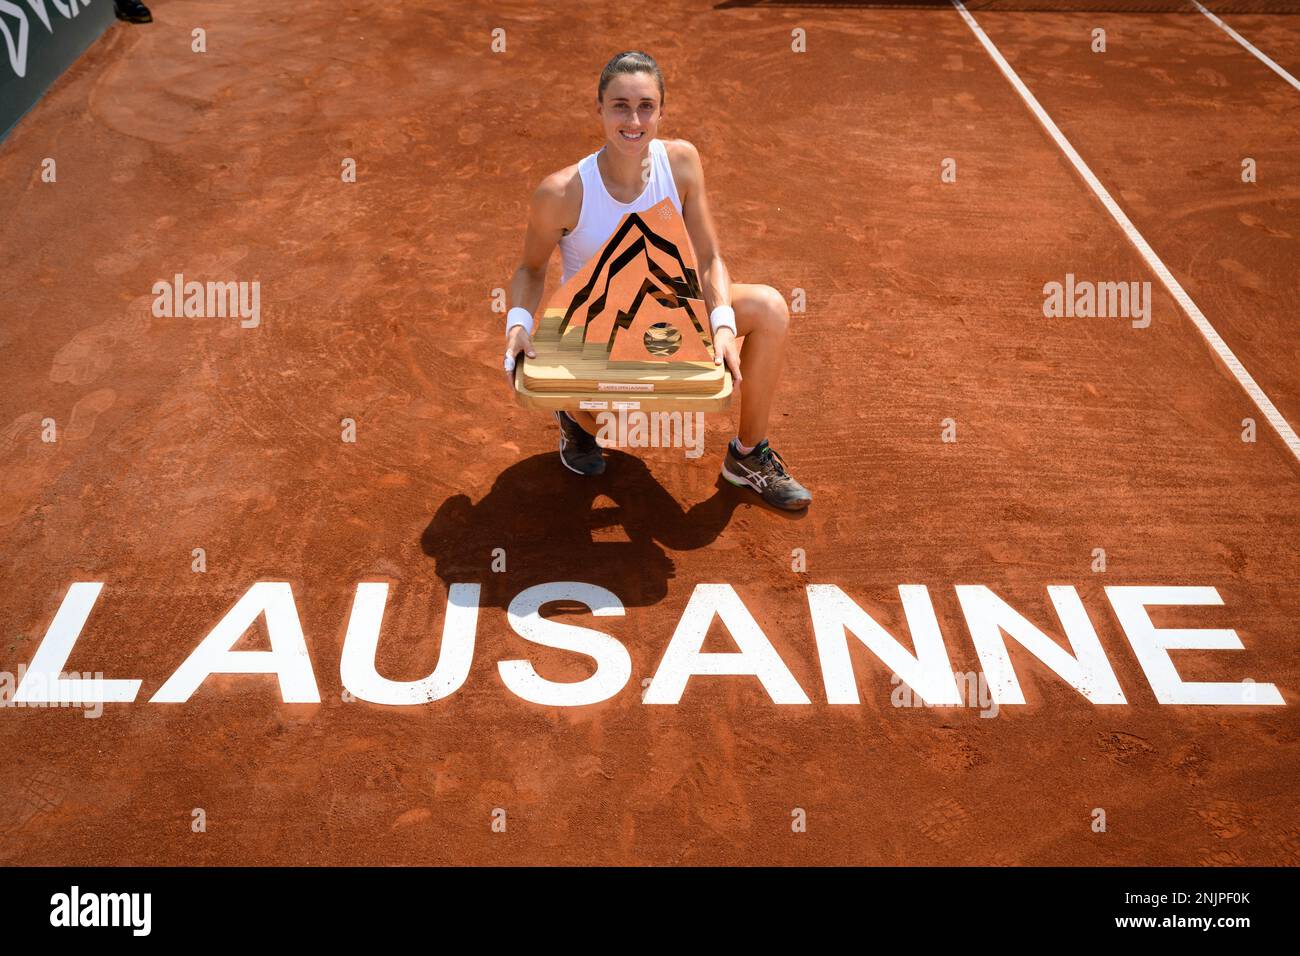 Croatias Petra Martic celebrates her victory with the trophy after the final match against Serbias Olga Danilovic at the WTA International Ladies Open Lausanne tennis tournament, in Lausanne, Switzerland, Sunday, July 17,